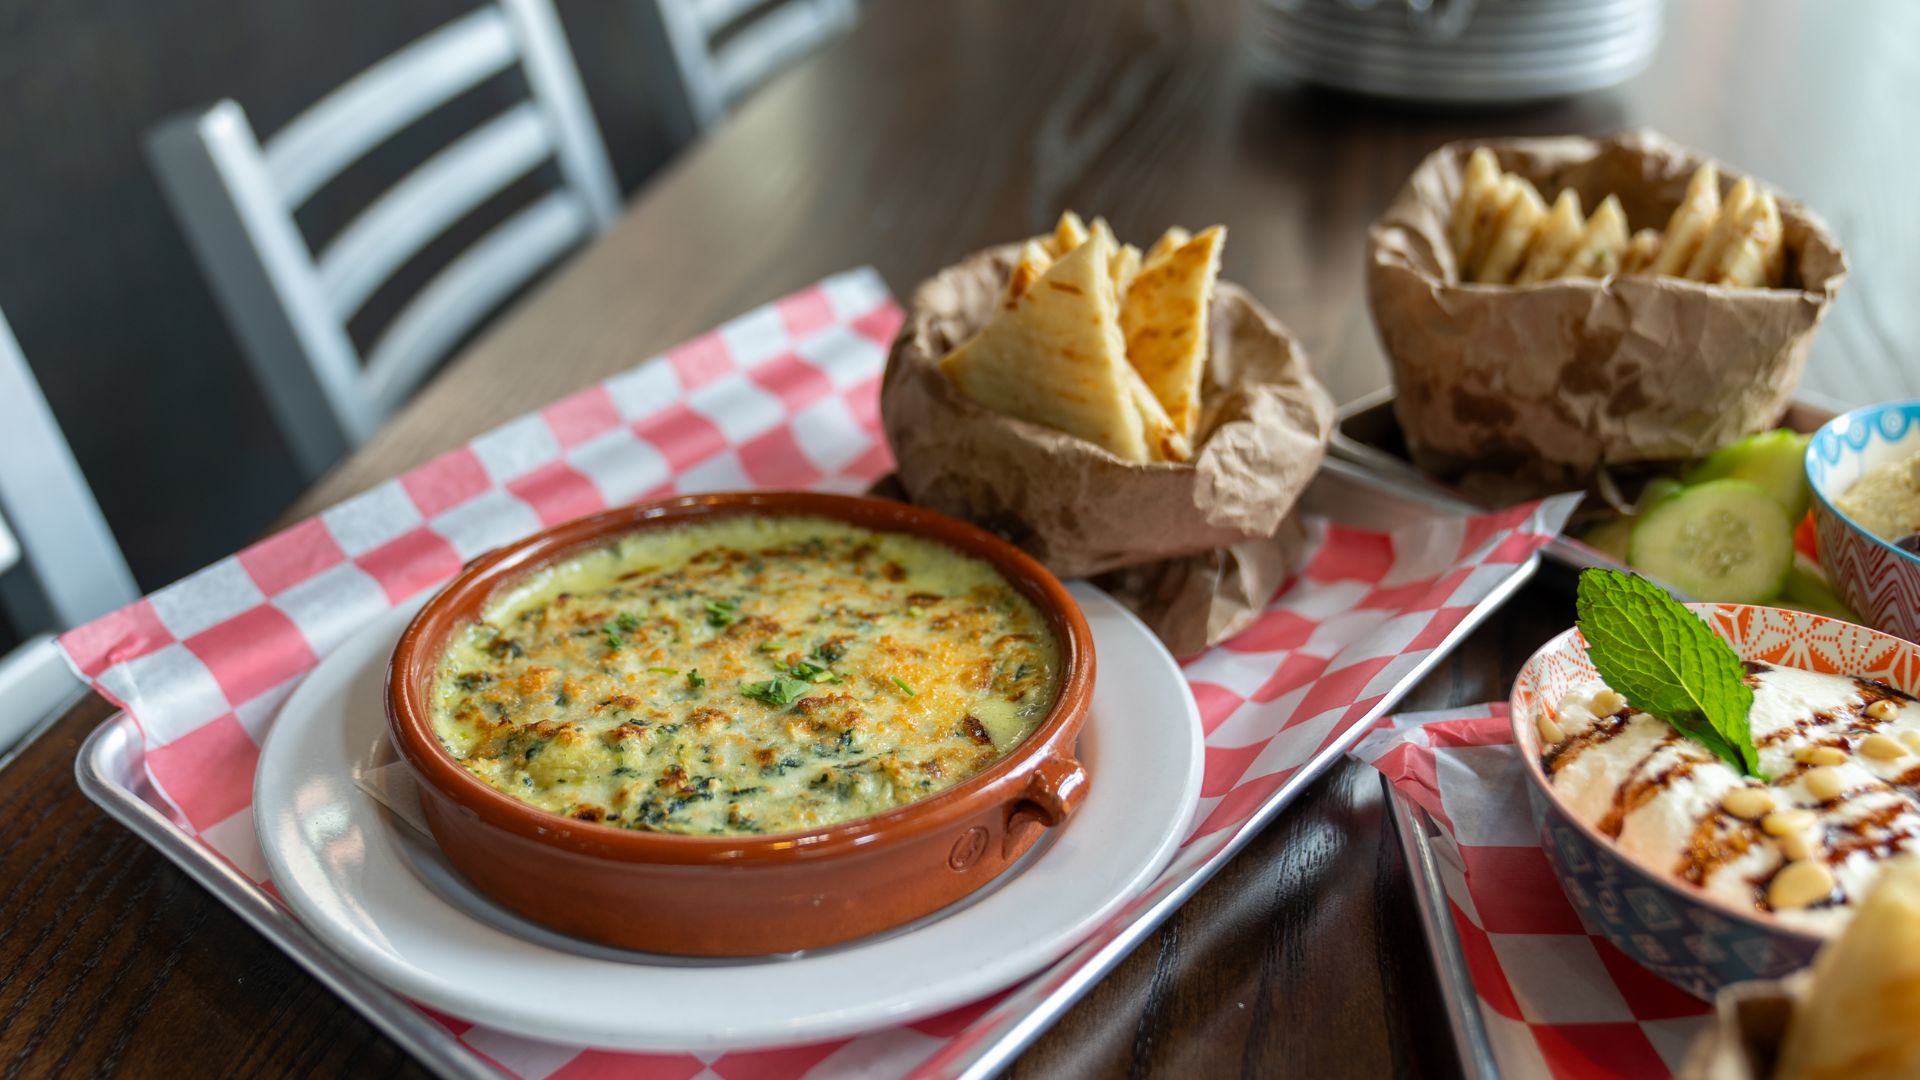 A gooey, cheesy dip is paired with pita.